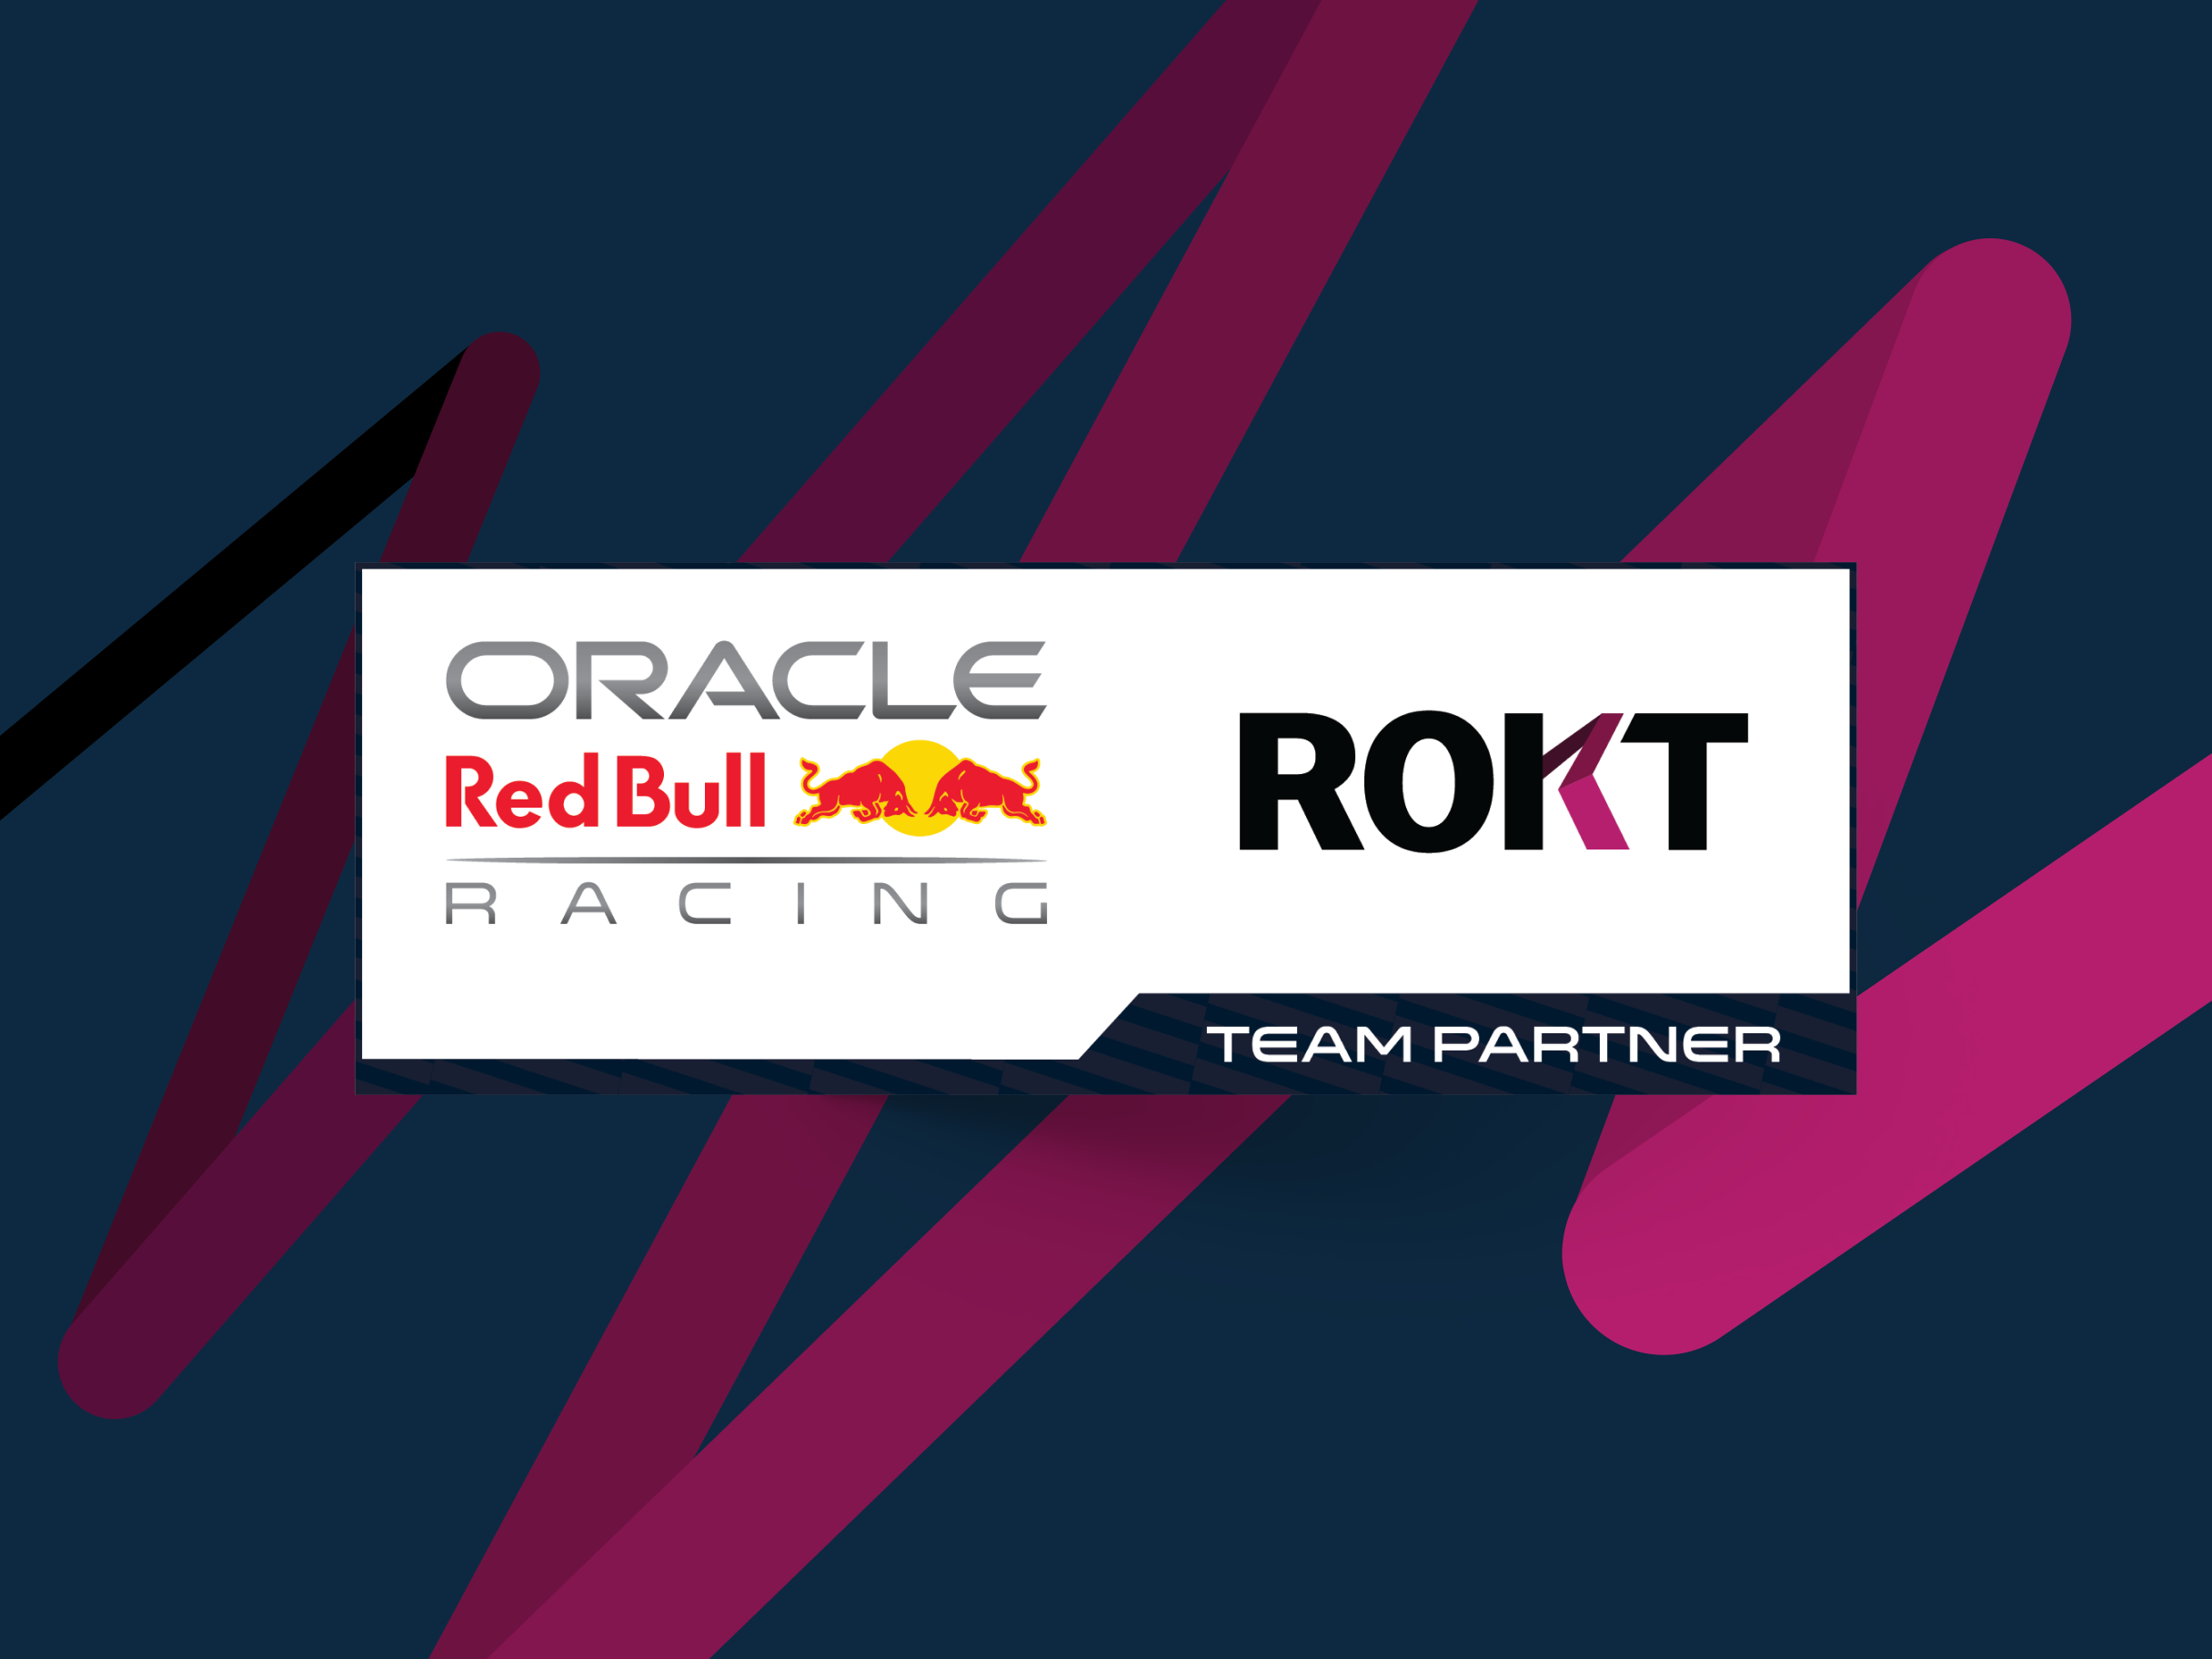 Going to the races with Oracle Red Bull Racing